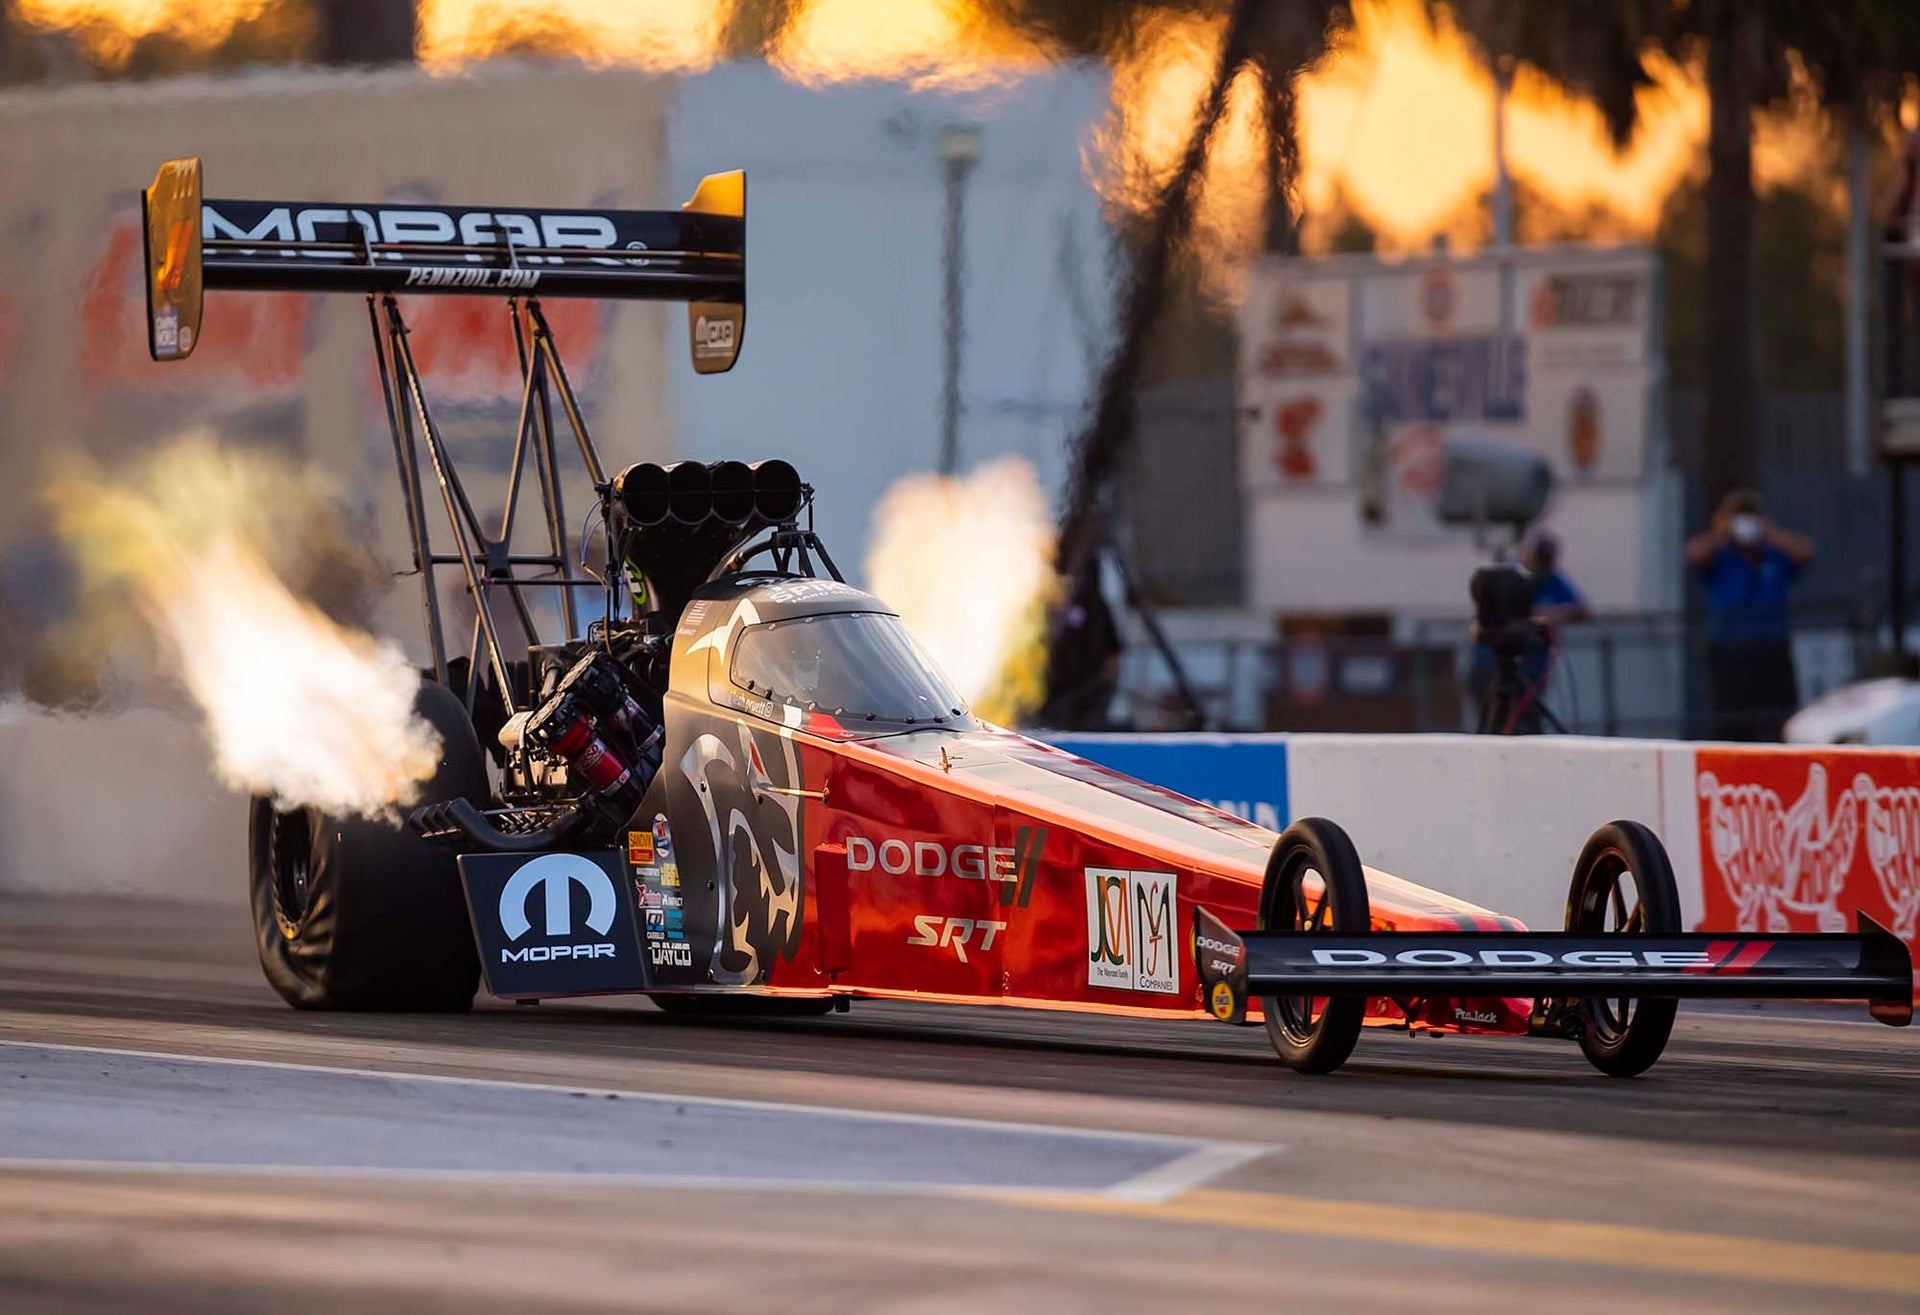 Leah Goes 3rd Quickest in Top Fuel, Gatornats Qualifying